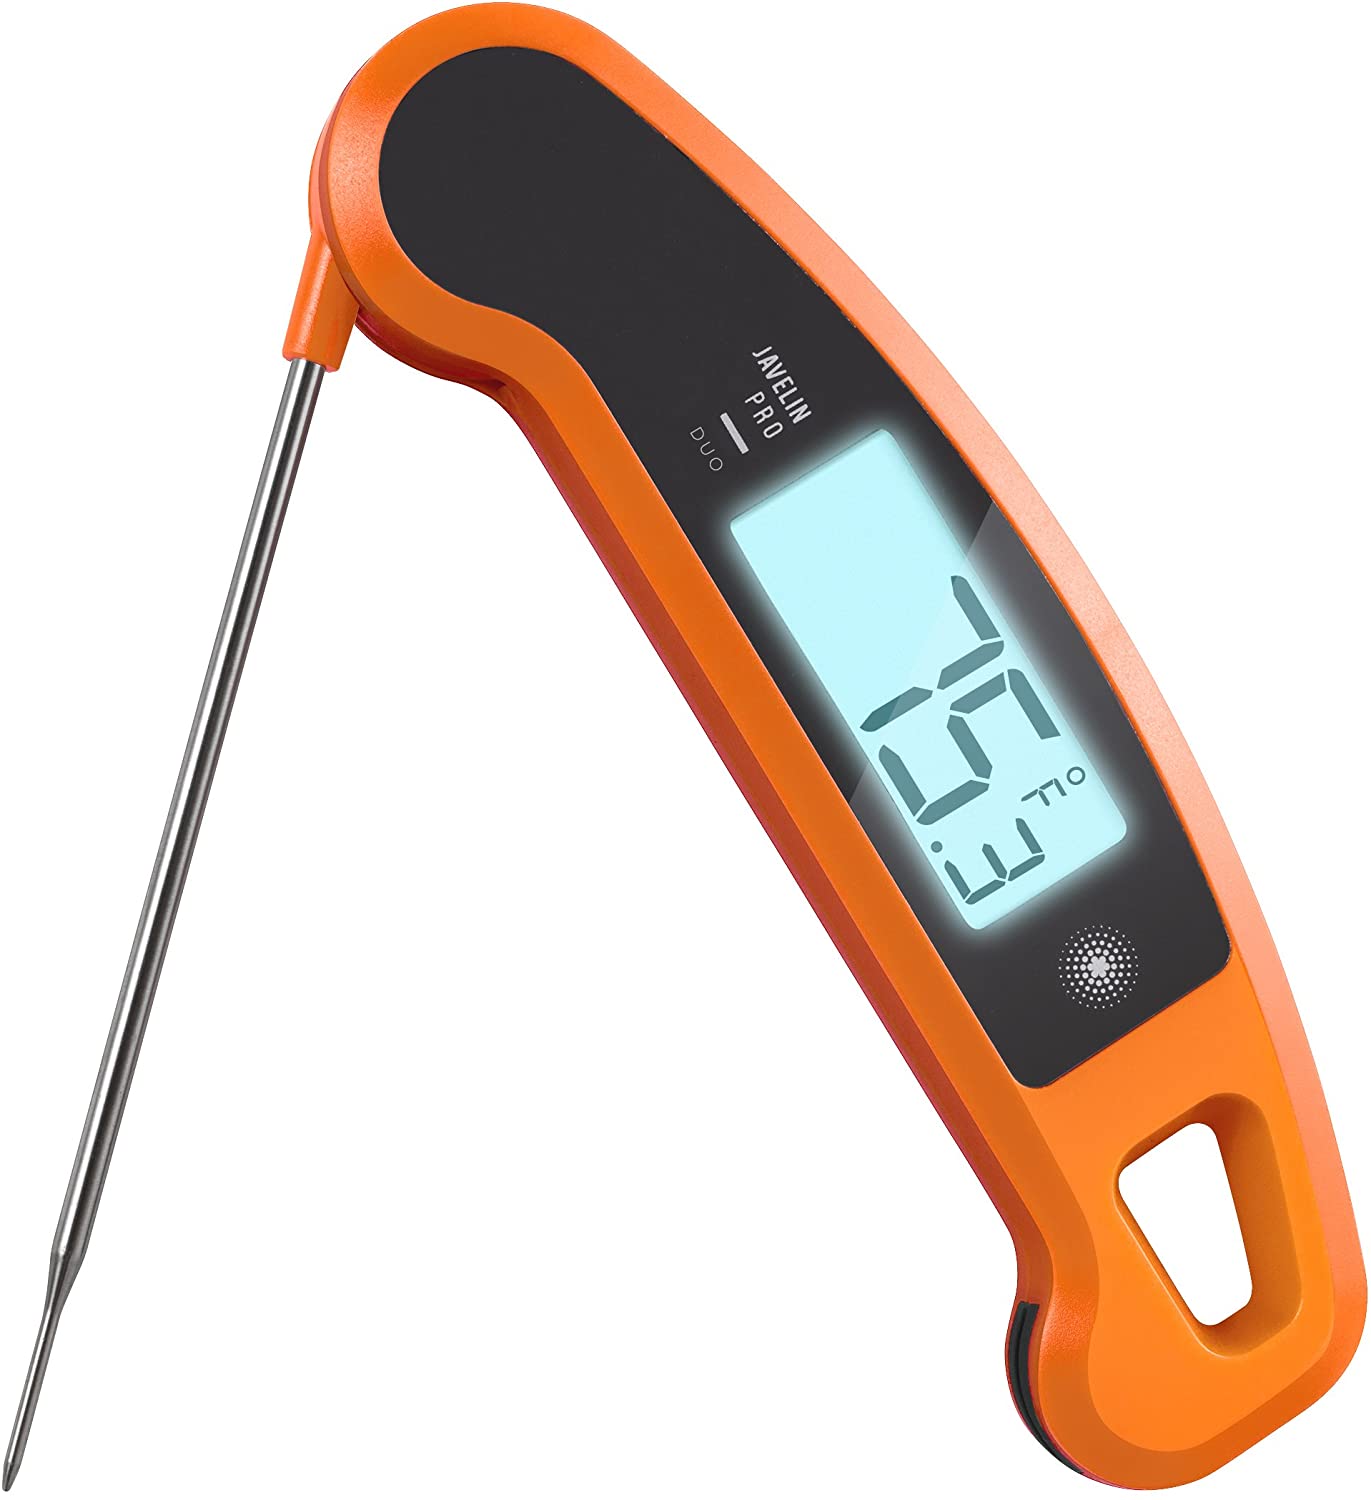 Lavatools Javelin PRO Duo Ambidextrous Backlit Professional Digital Instant Read Meat Thermometer for Kitchen, Food Cooking, Grill, BBQ, Smoker, Candy, Brewing, Coffee, and Oil Deep Frying (Orange)